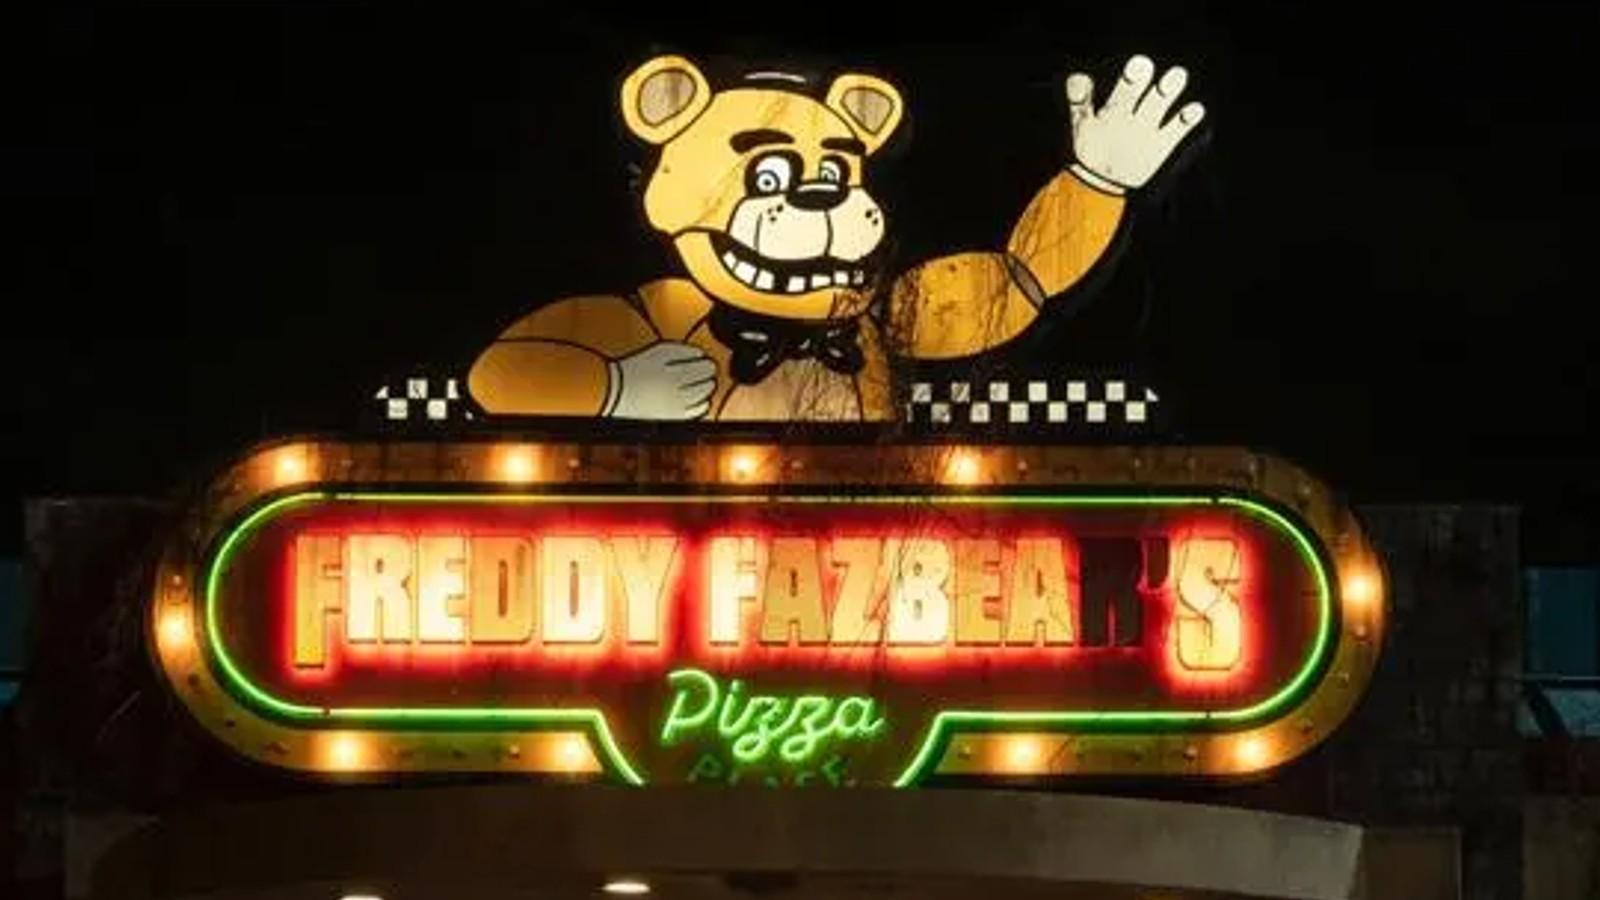 Surprise! Five Nights at Freddy's 4 is out now